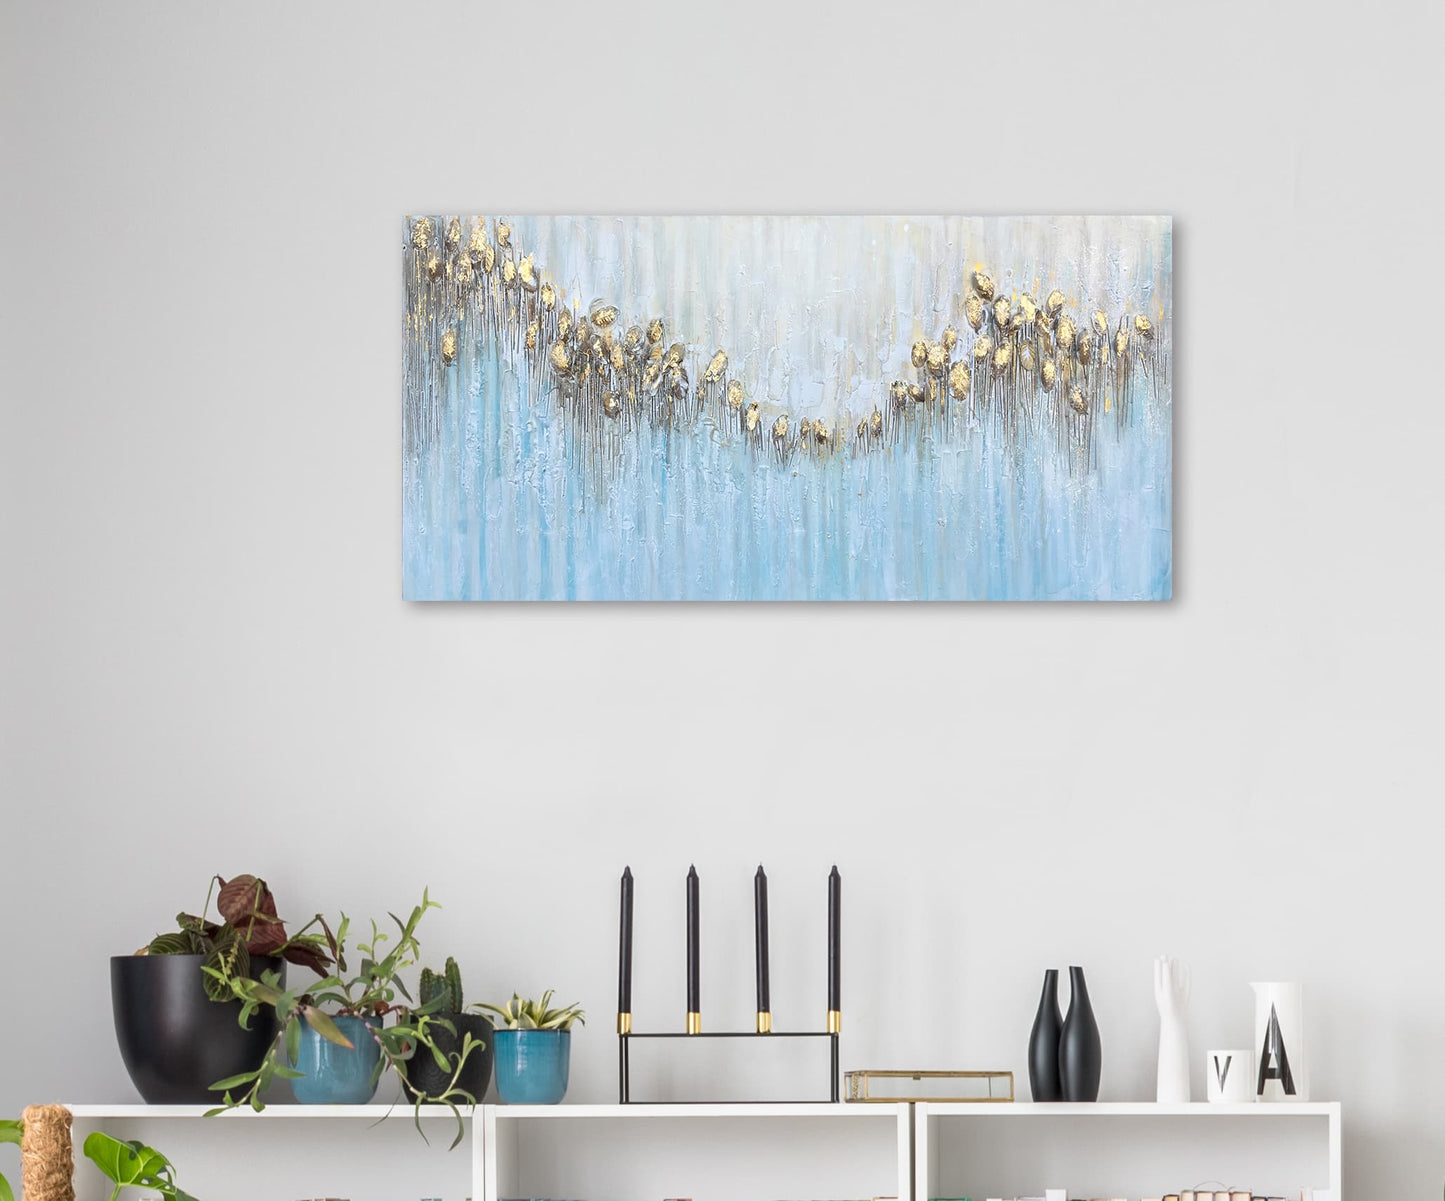 Hand Painted Abstract Art "The Golden Note" Oil Painting Original, Wall art for living room, bedroom, Office - Wrapped Canvas Painting